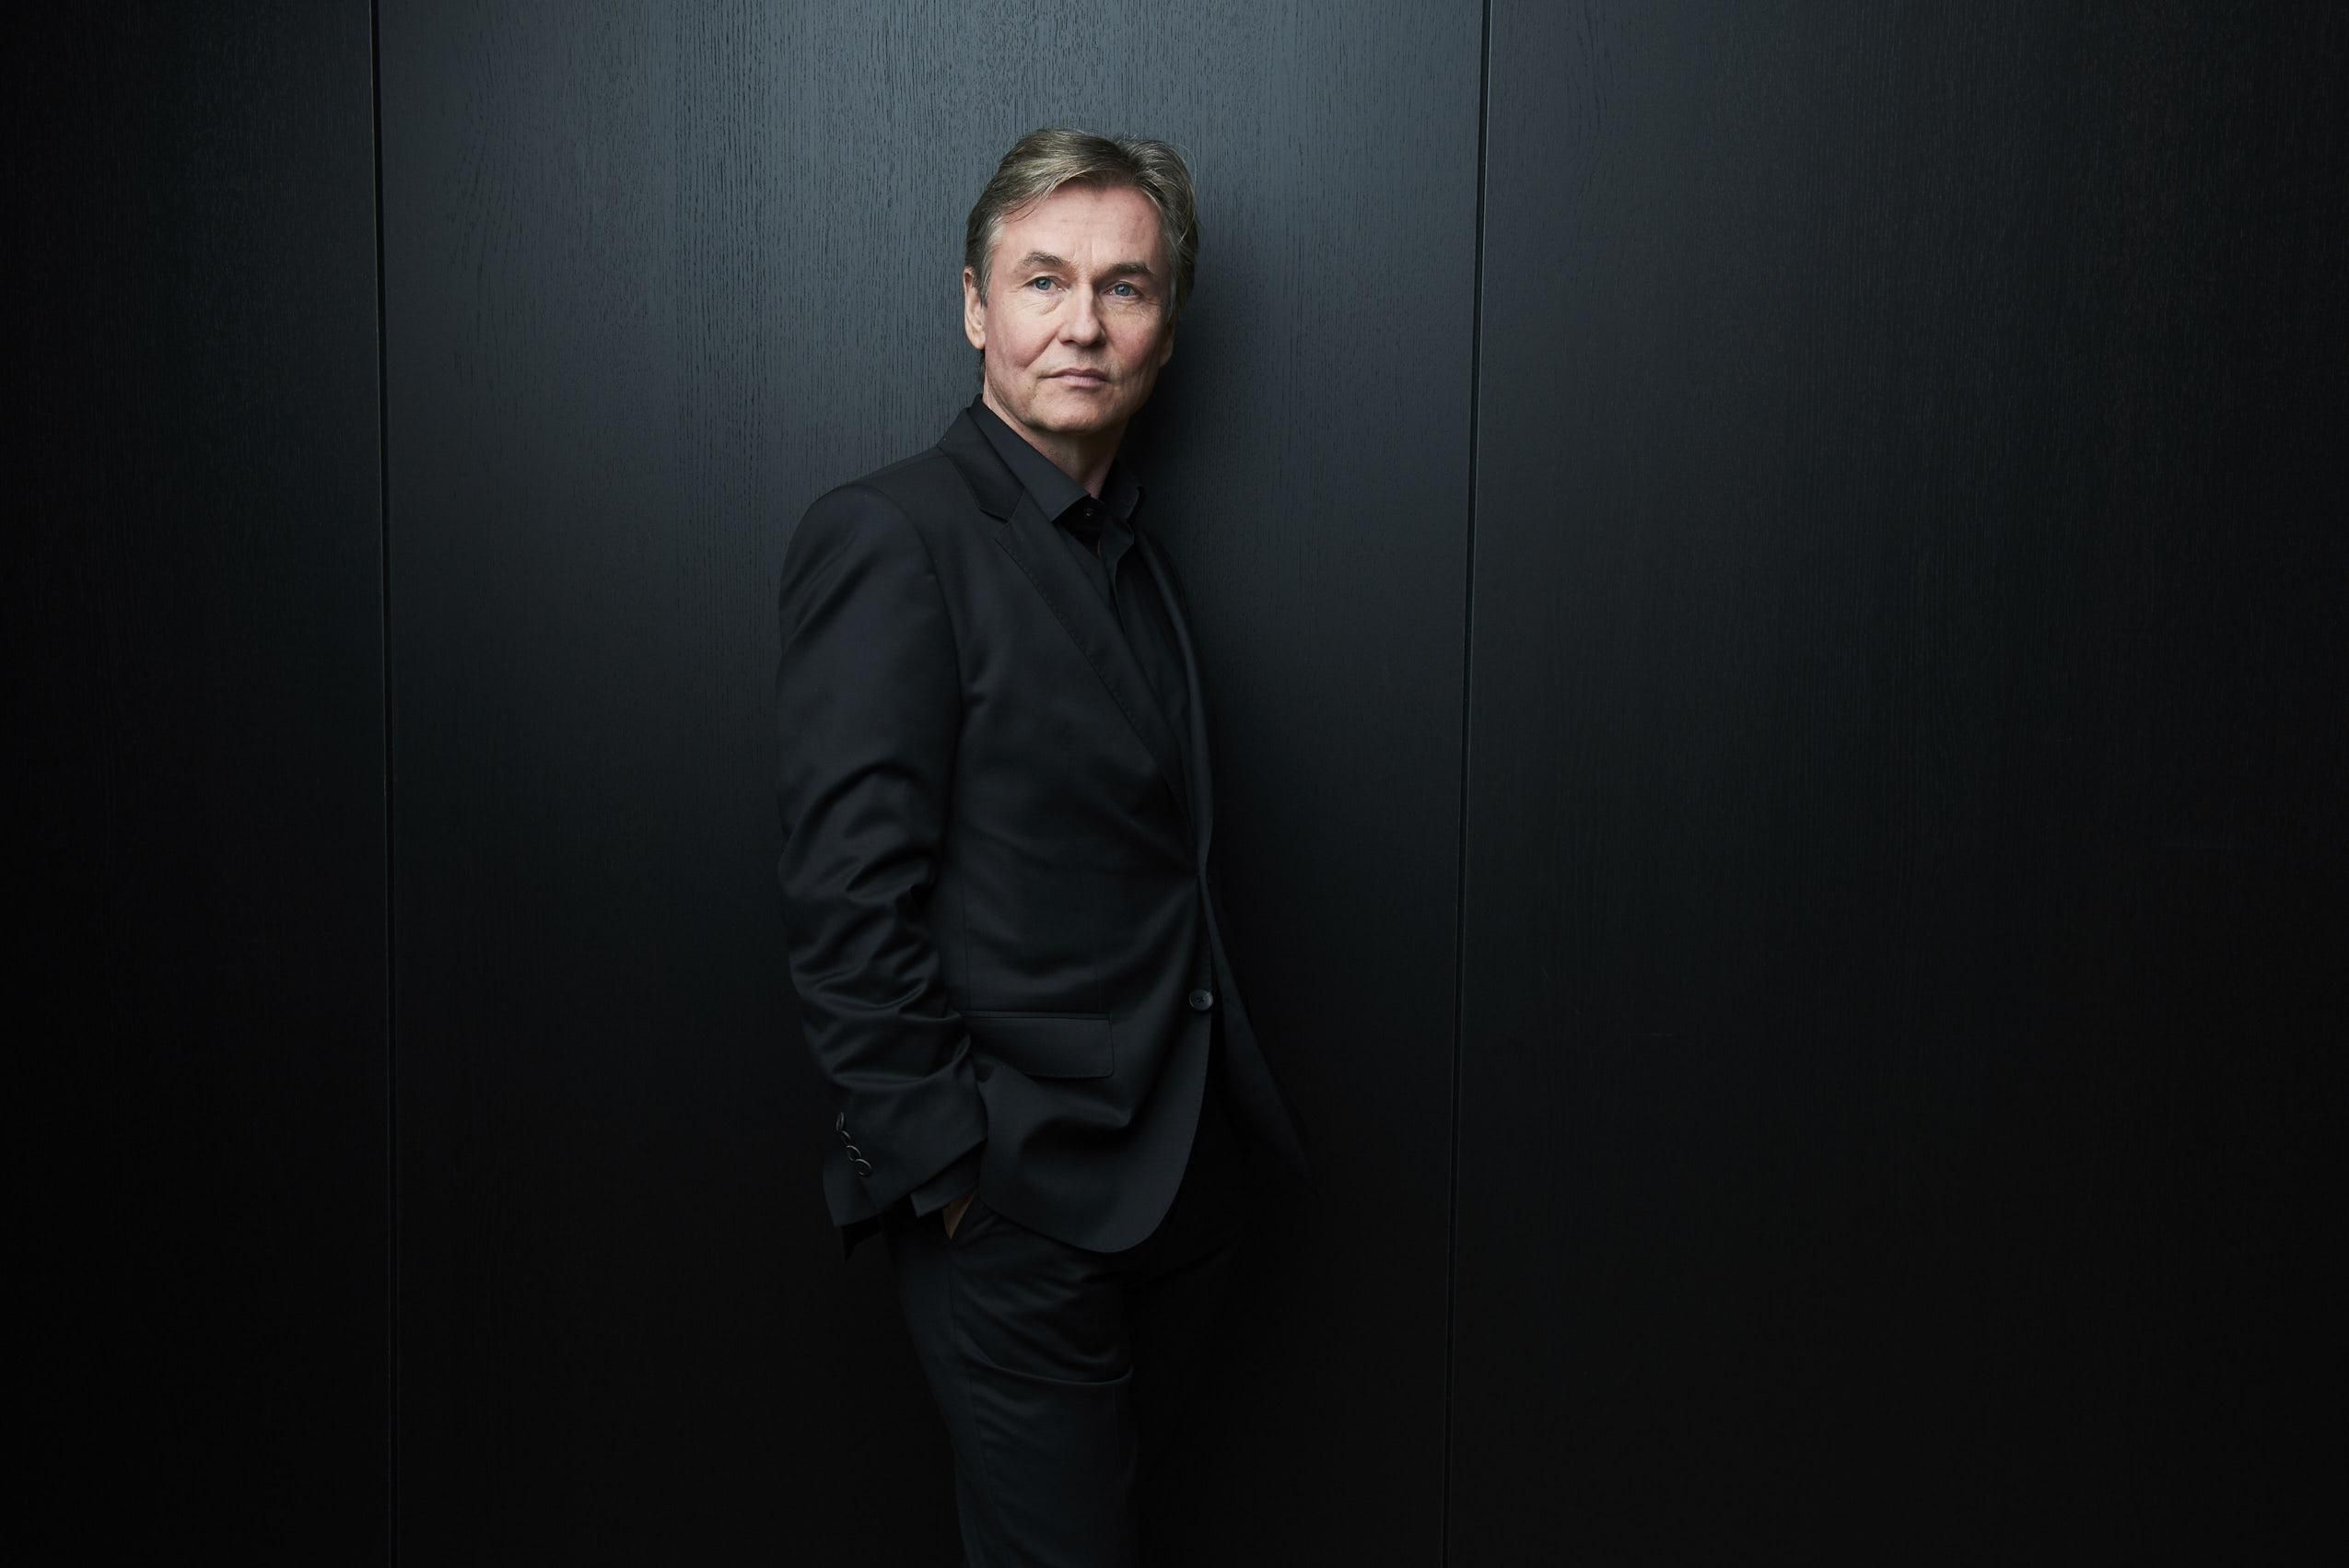 SF Symphony returns in October with Esa-Pekka Salonen, a maestro with a mission